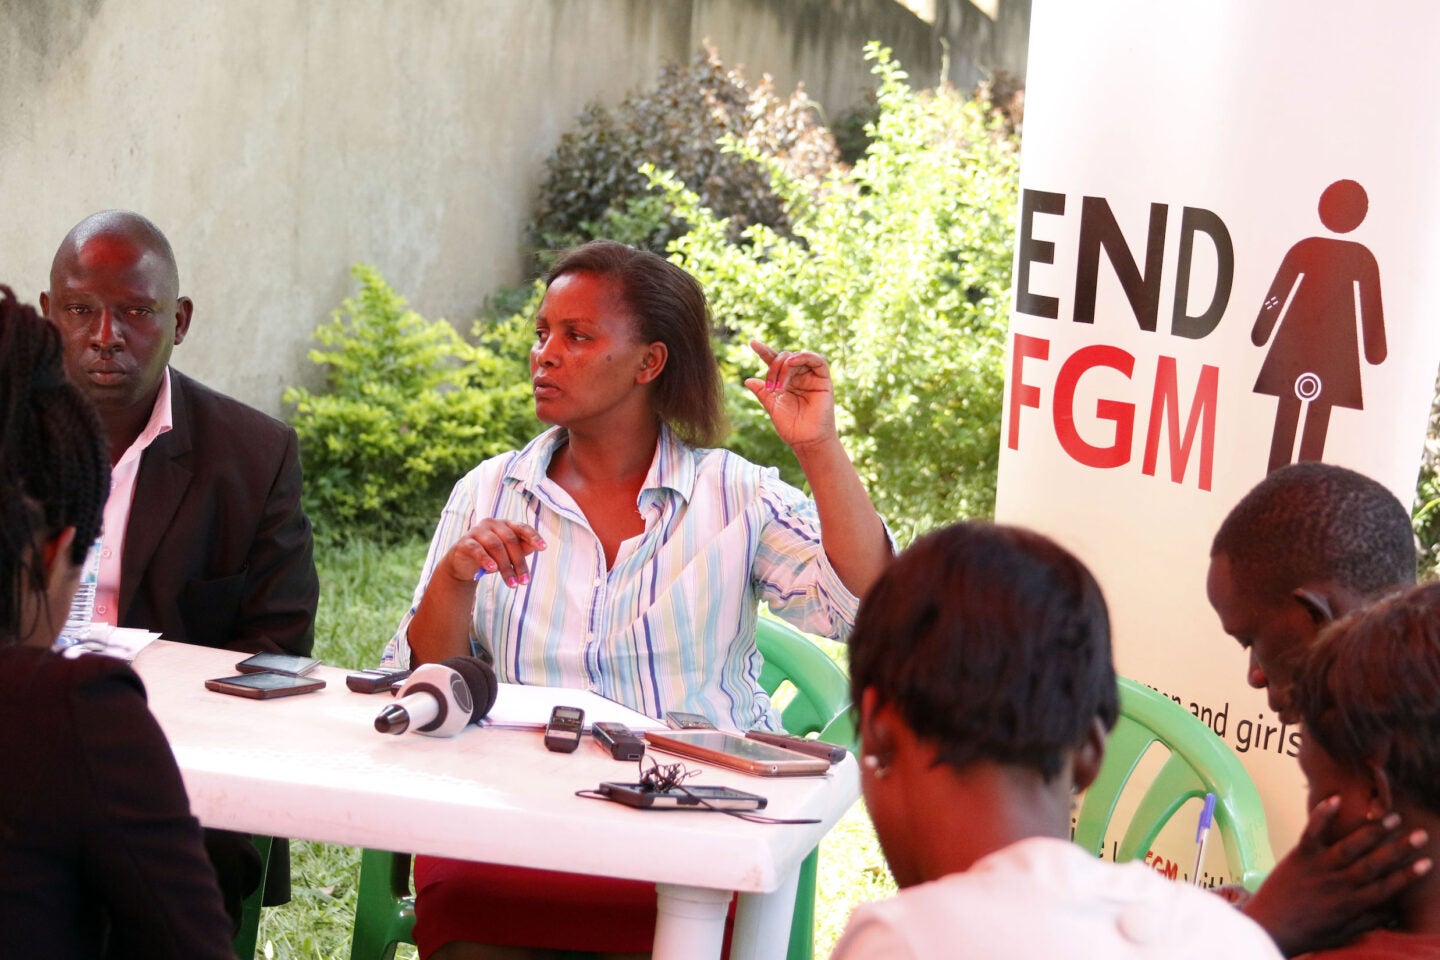 Media Science Cafe in Uganda -- group of people around a table outdoors discussing female genital mutilation